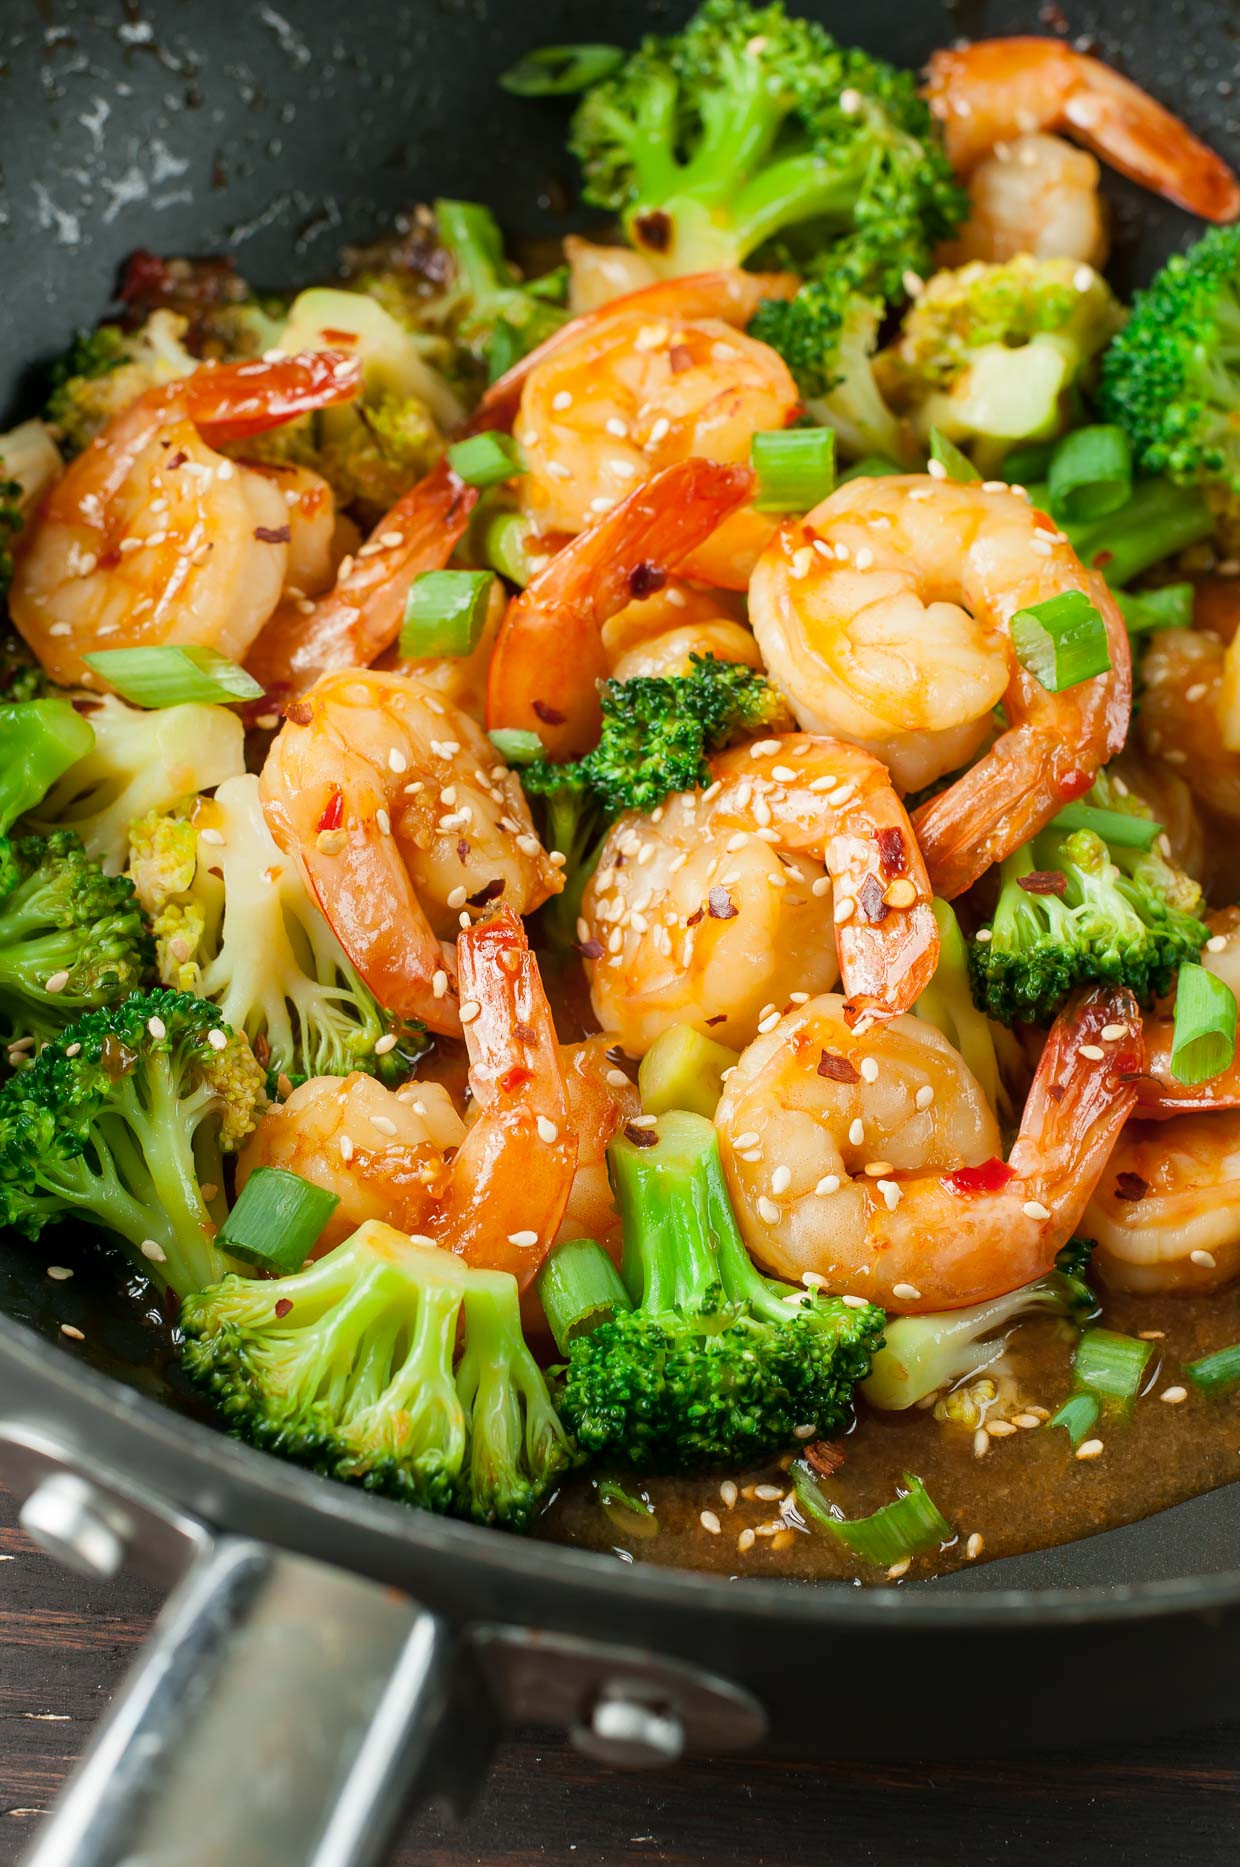 Shrimp And Fish Recipes
 Fabulous Fish and Seafood Recipes Healthy World Cuisine